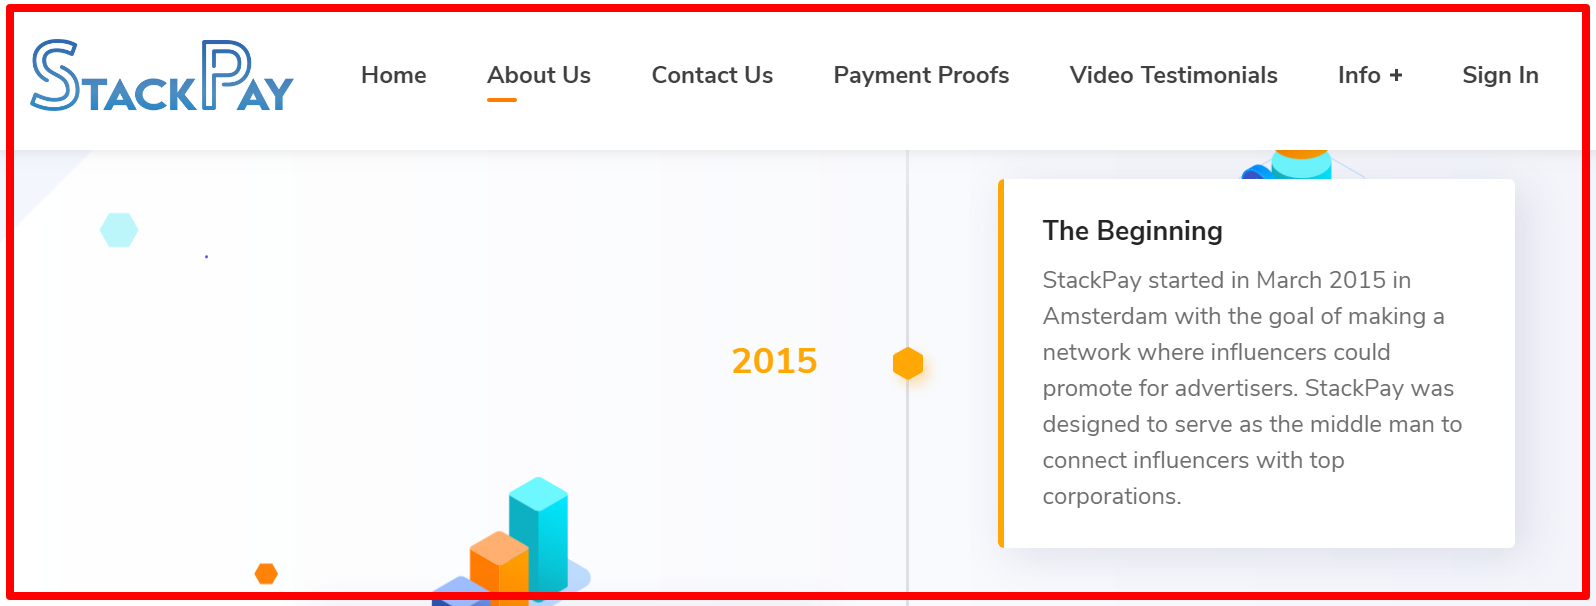 About Us – StackPay